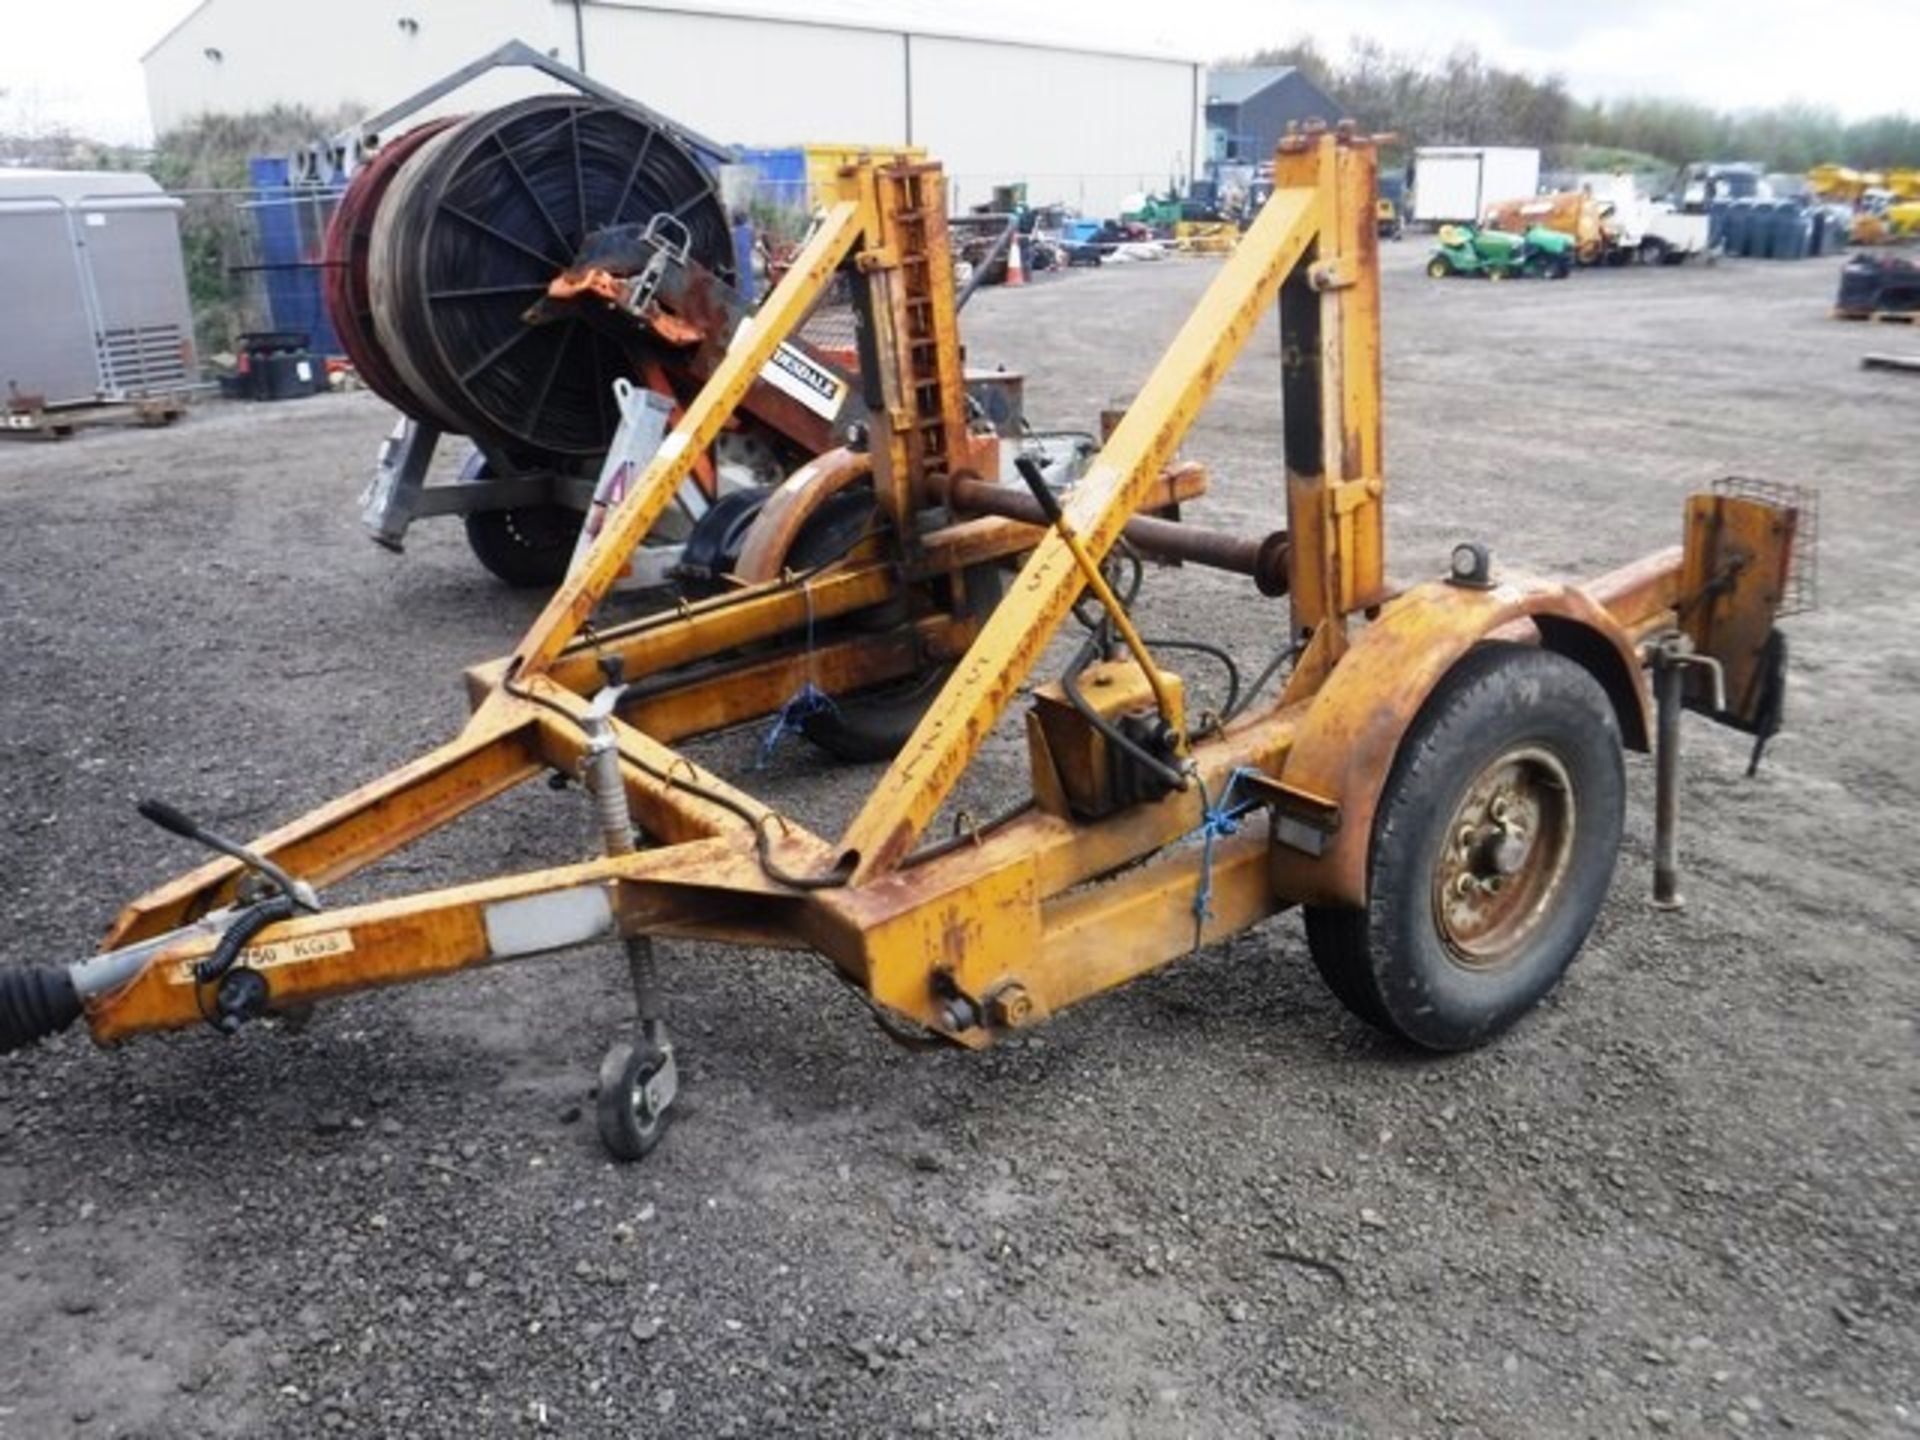 CABLE PULLING TRAILER - single axle. L - 12ft, W - 7.5ft, Asset no 75-5124.